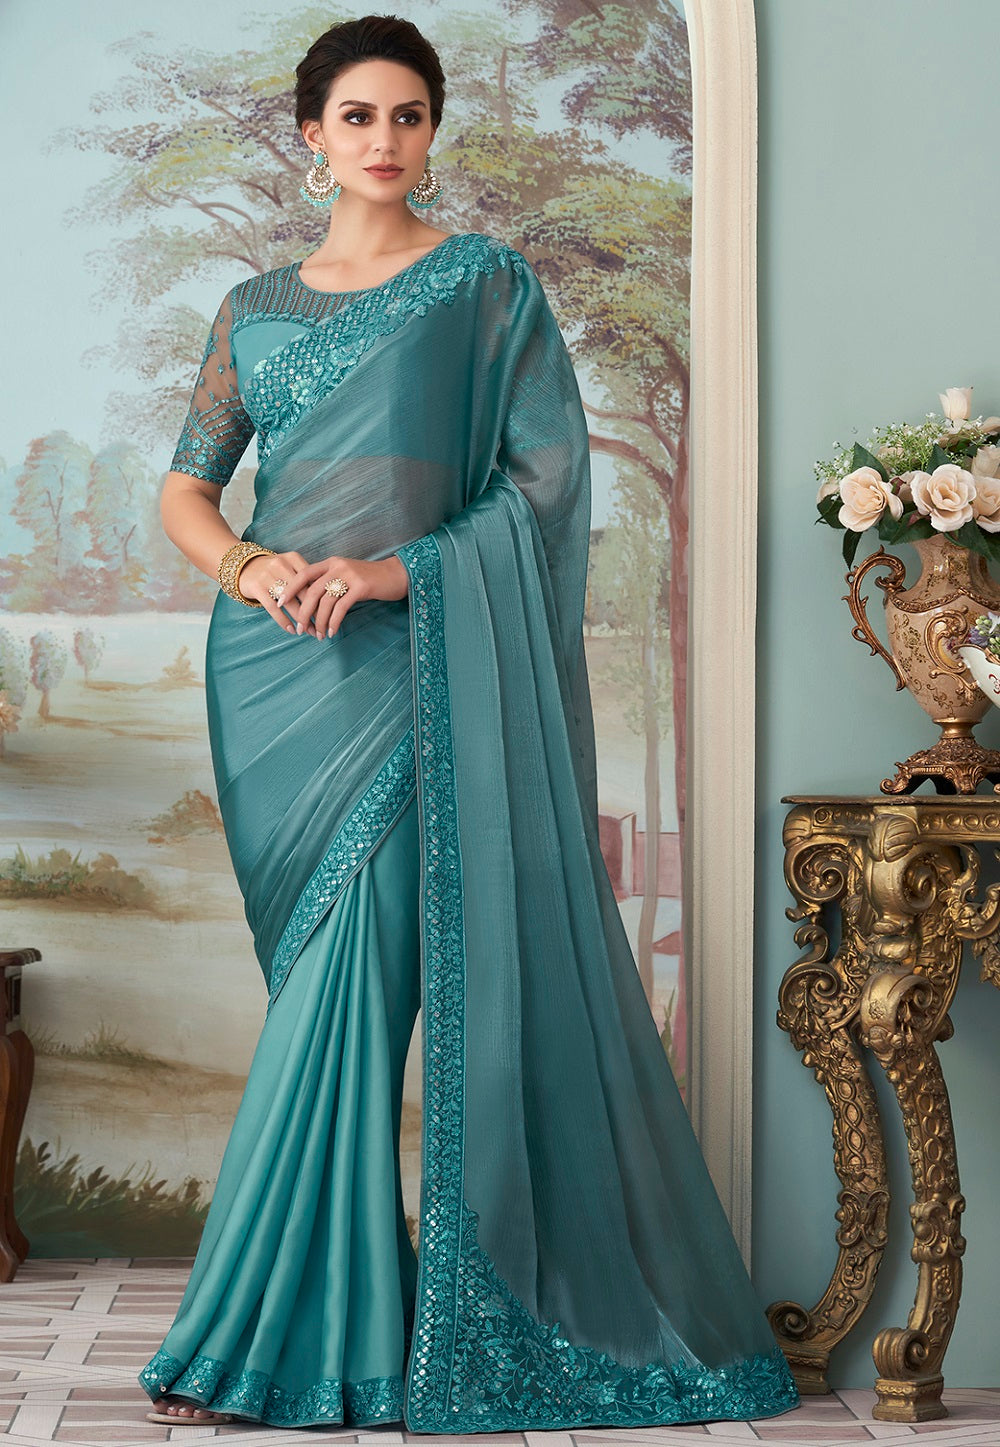 Georgette Silk Embroidered Saree in Teal Blue